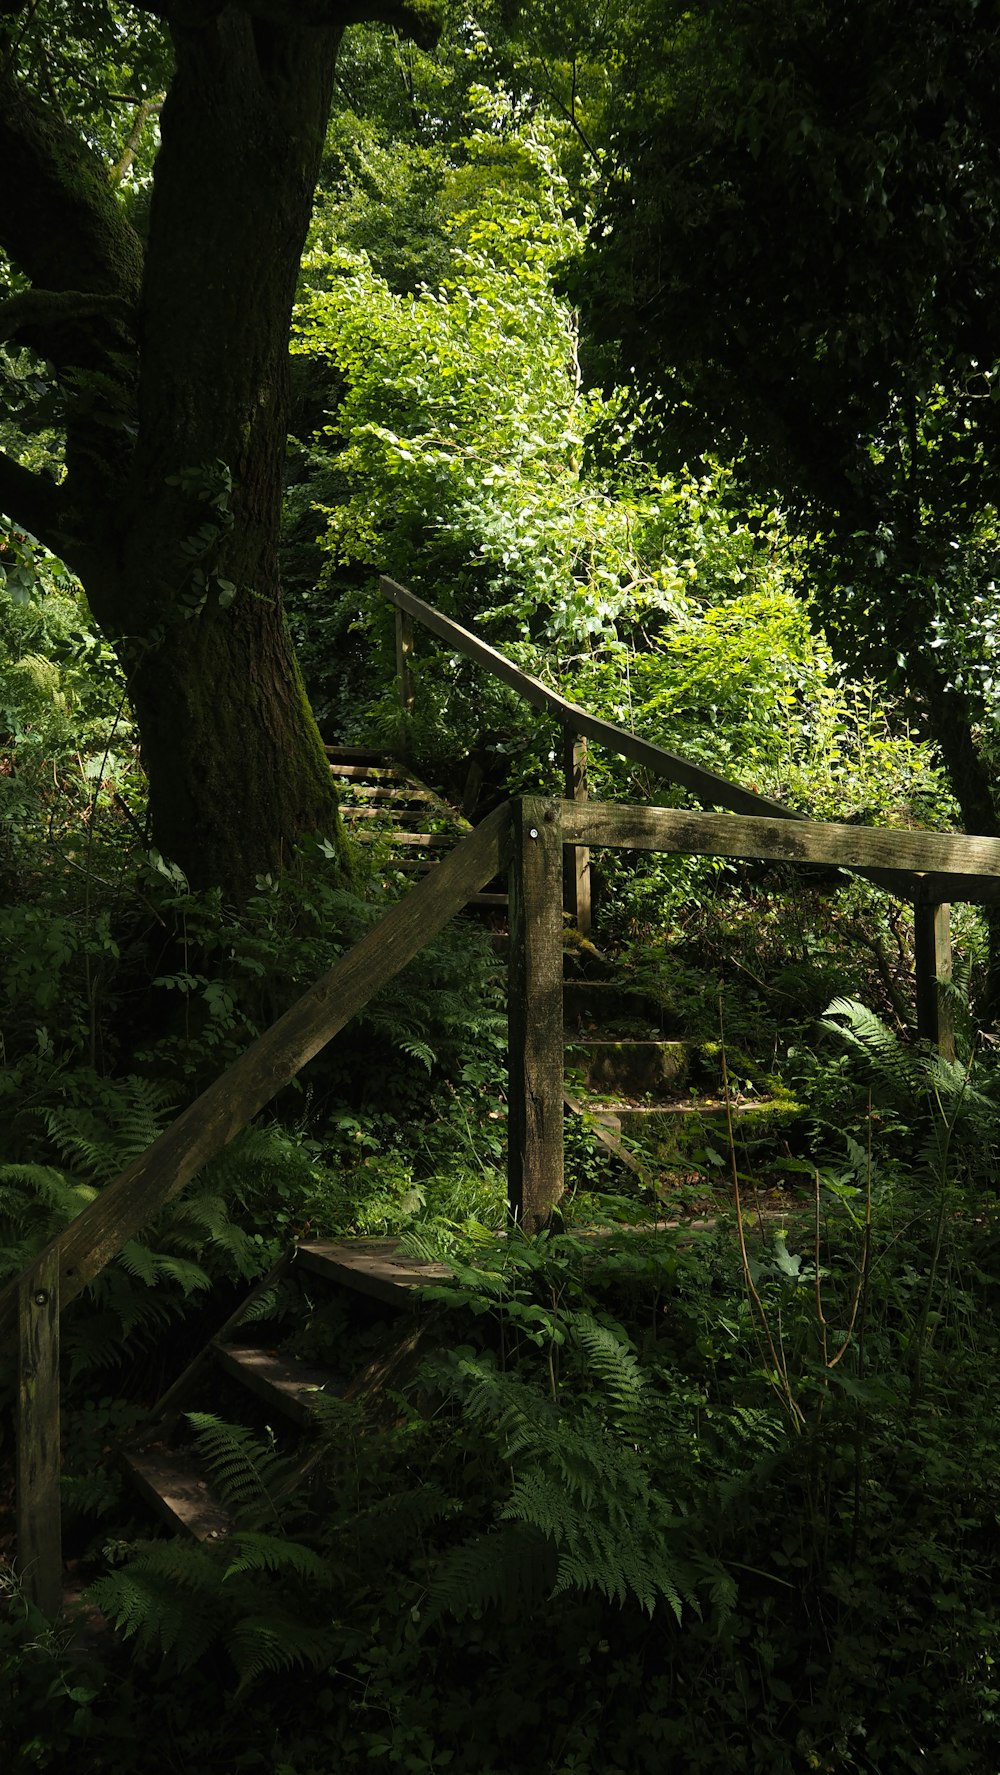 a wooden gate in the middle of a lush green forest